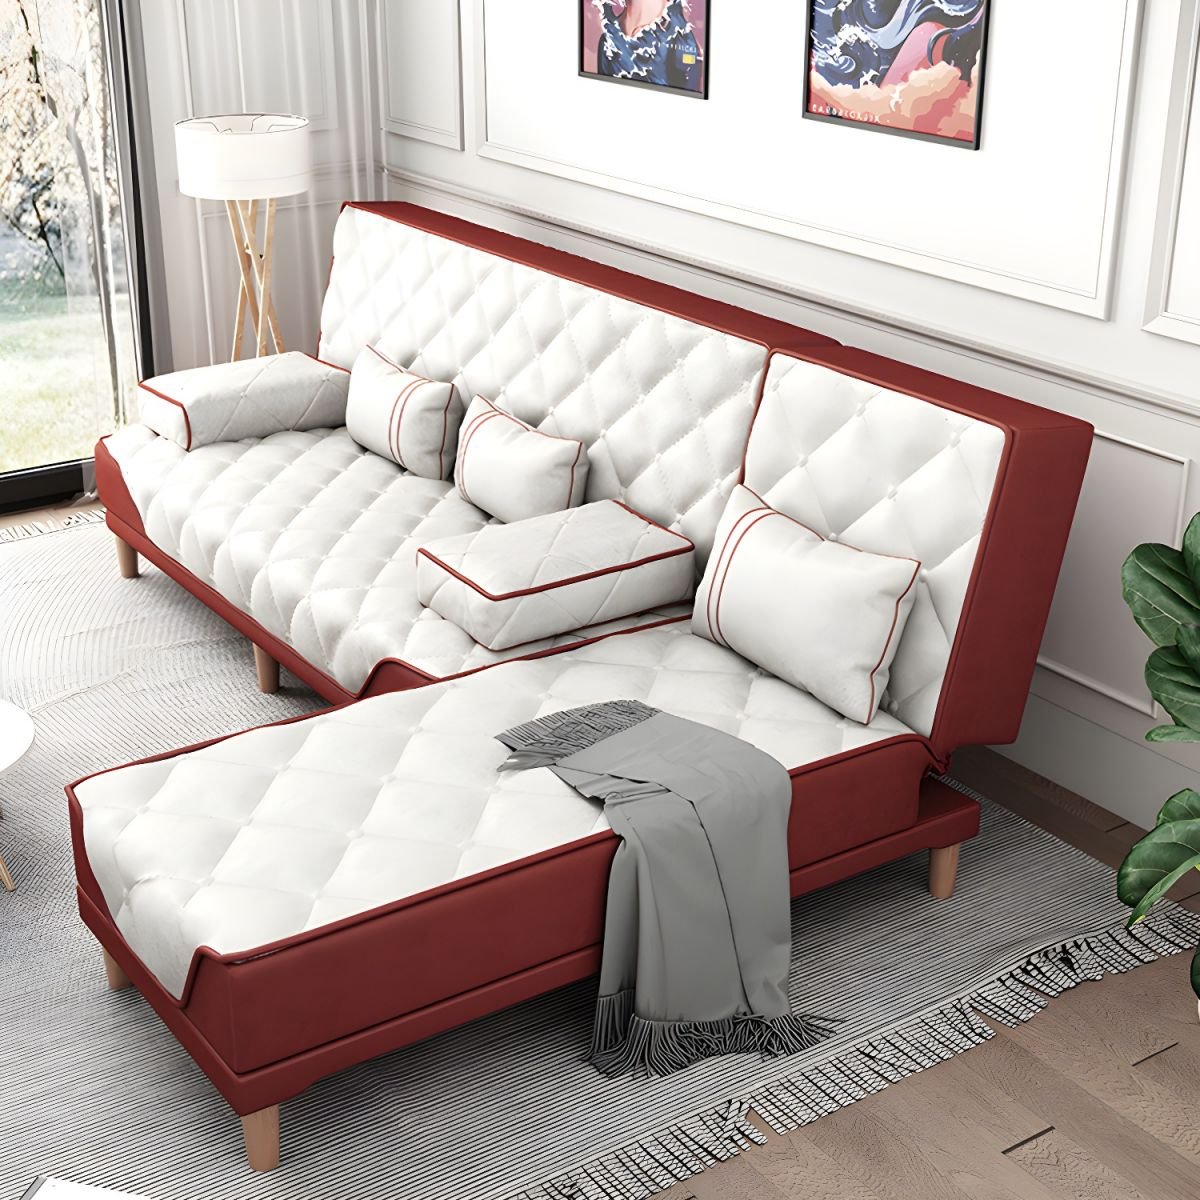 Contemporary Tight Back Convertible Sofa and Chaise with Pillow Top Arm - 96"L x 57"W x 34"H Red-White Tech Cloth